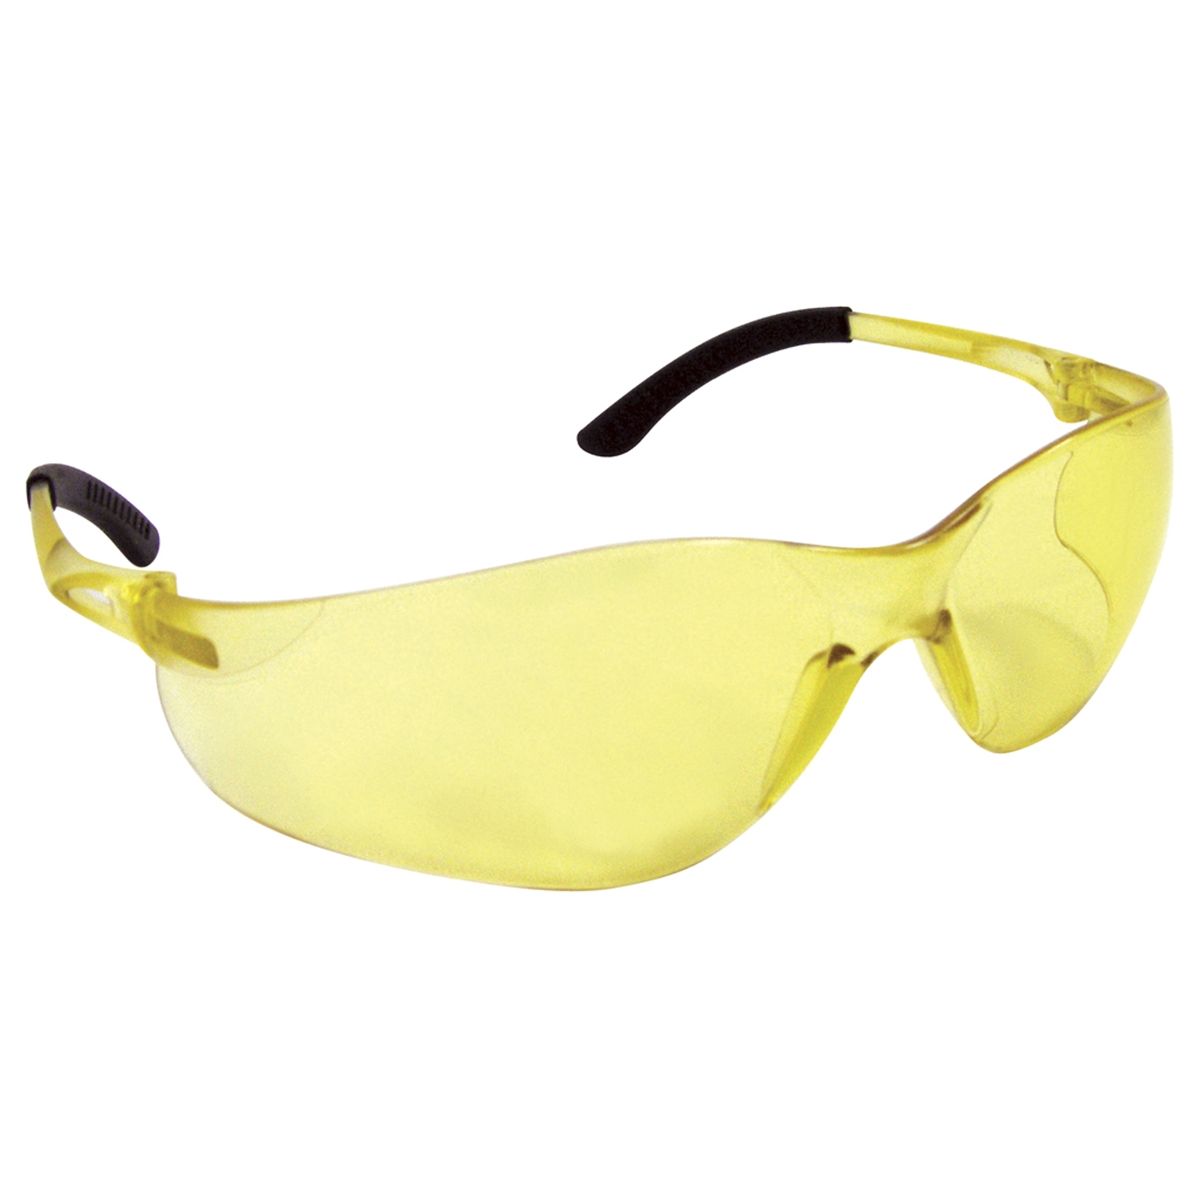 NSX TURBO SAFETY GLASSES YELLOW LENS POLYBAG